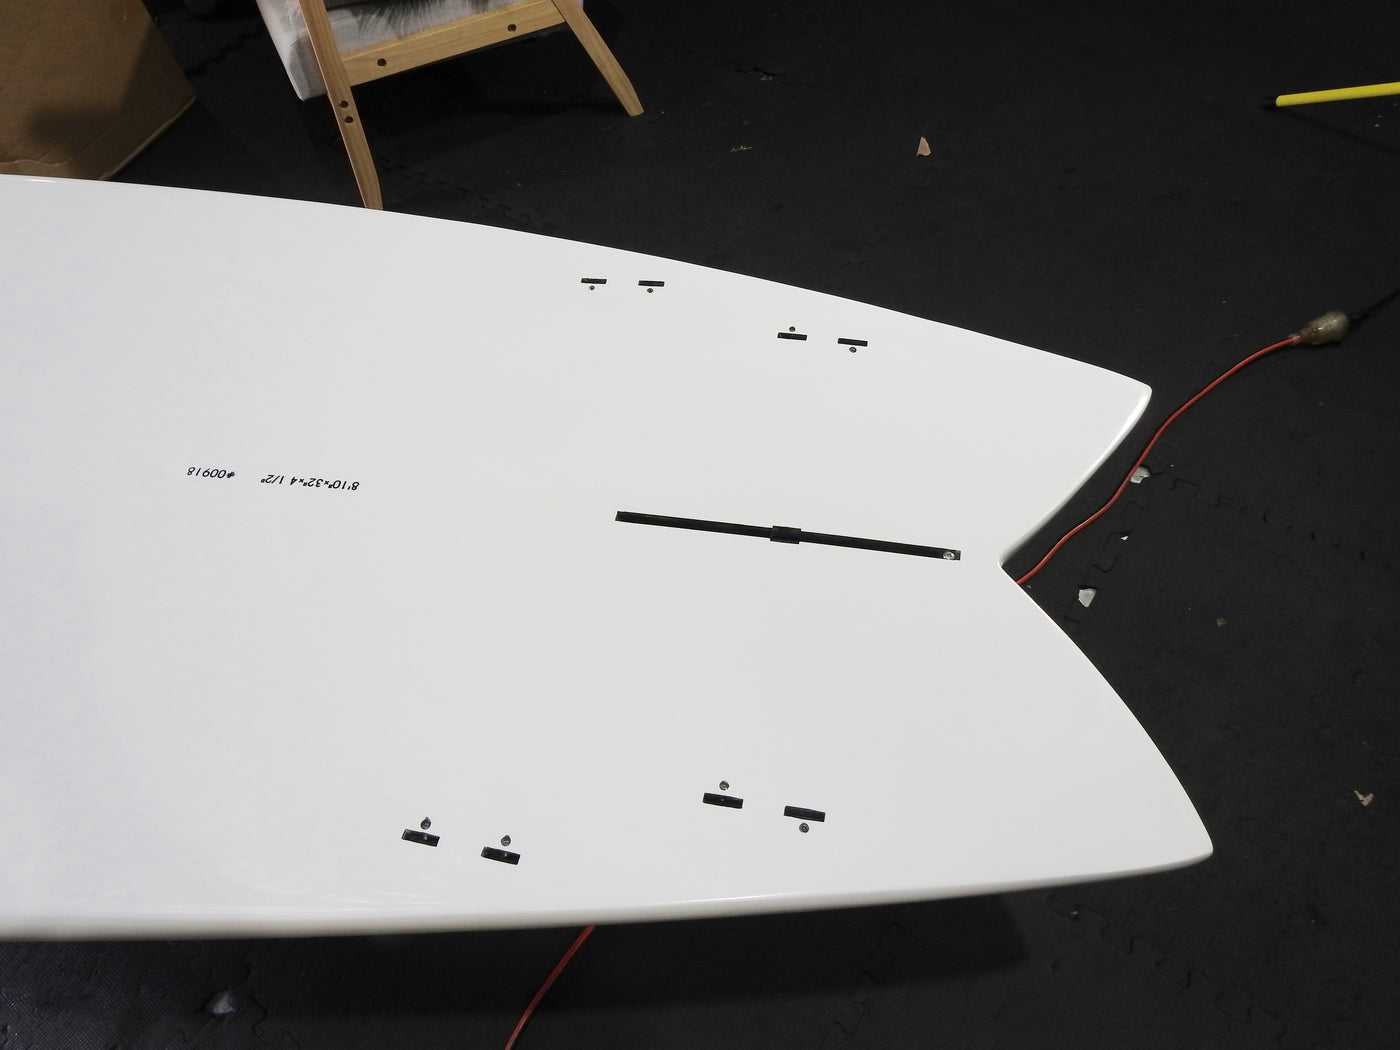 8’10” x 32” Galaxy Bounce All White With Teal Deck Pad Surf SUP - Alleydesigns  Pty Ltd                                             ABN: 44165571264